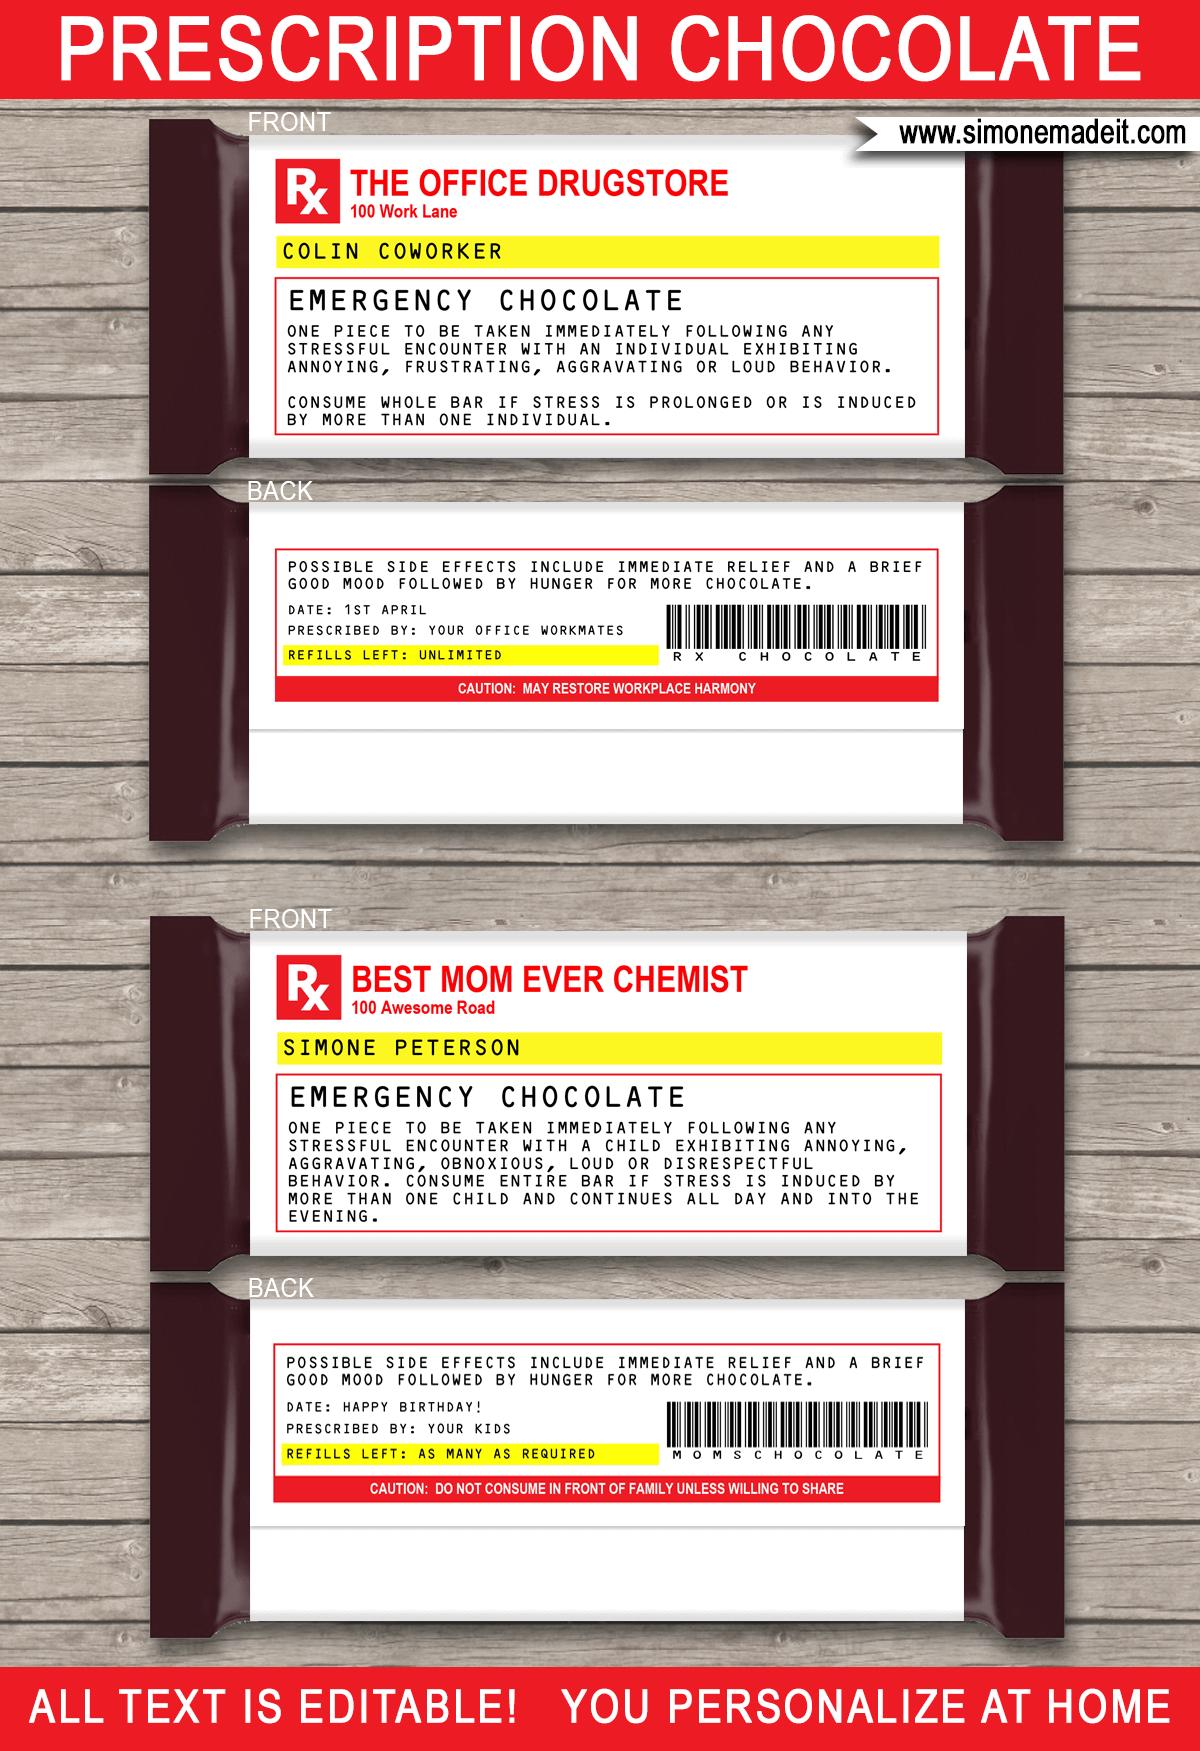 Emergency Chocolate Labels Printable Template - Fake RX Prescription Chocolate - Hersheys Candy Bar Wrappers - Birthday gift, Christmas gift, Secret Santa gift, Office Coworker gift, gift for any occasion - INSTANT DOWNLOAD via simonemadeit.com